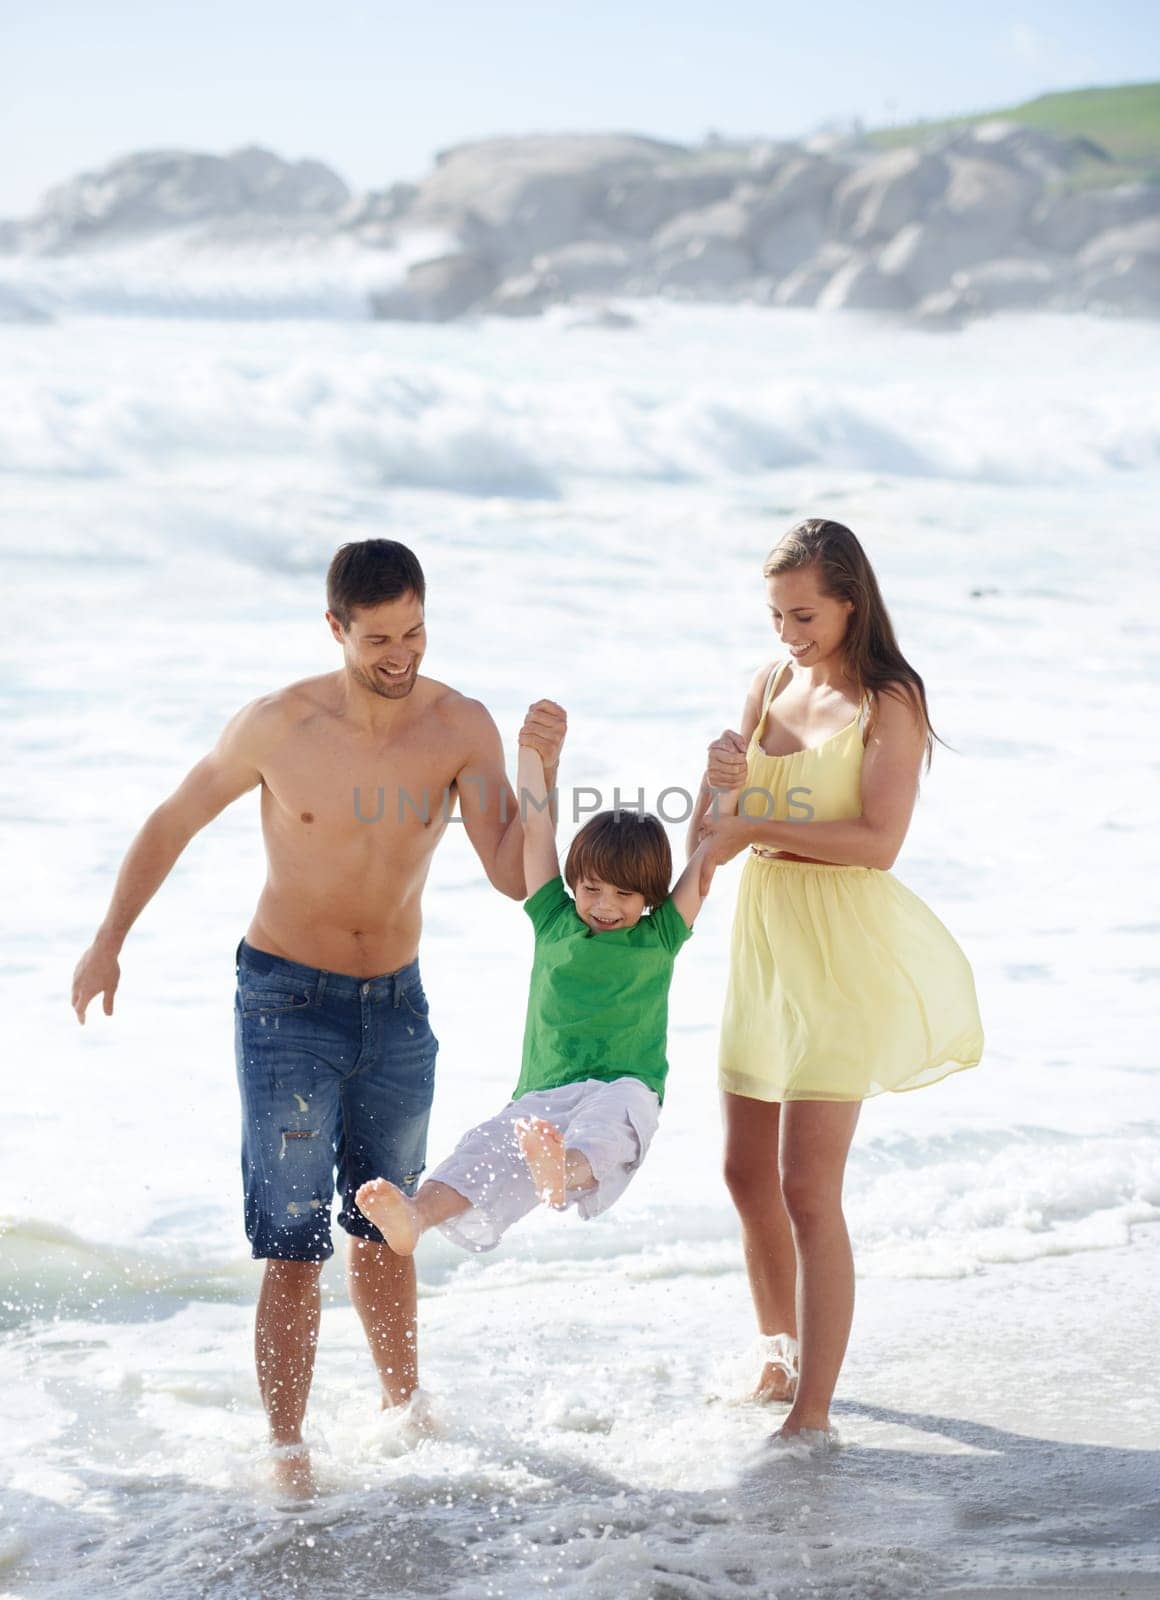 Family, summer and swinging child at beach for fun, travel or holiday with a smile in water. A man, woman and kid or son playing together on vacation at sea with waves, love and happiness outdoor.